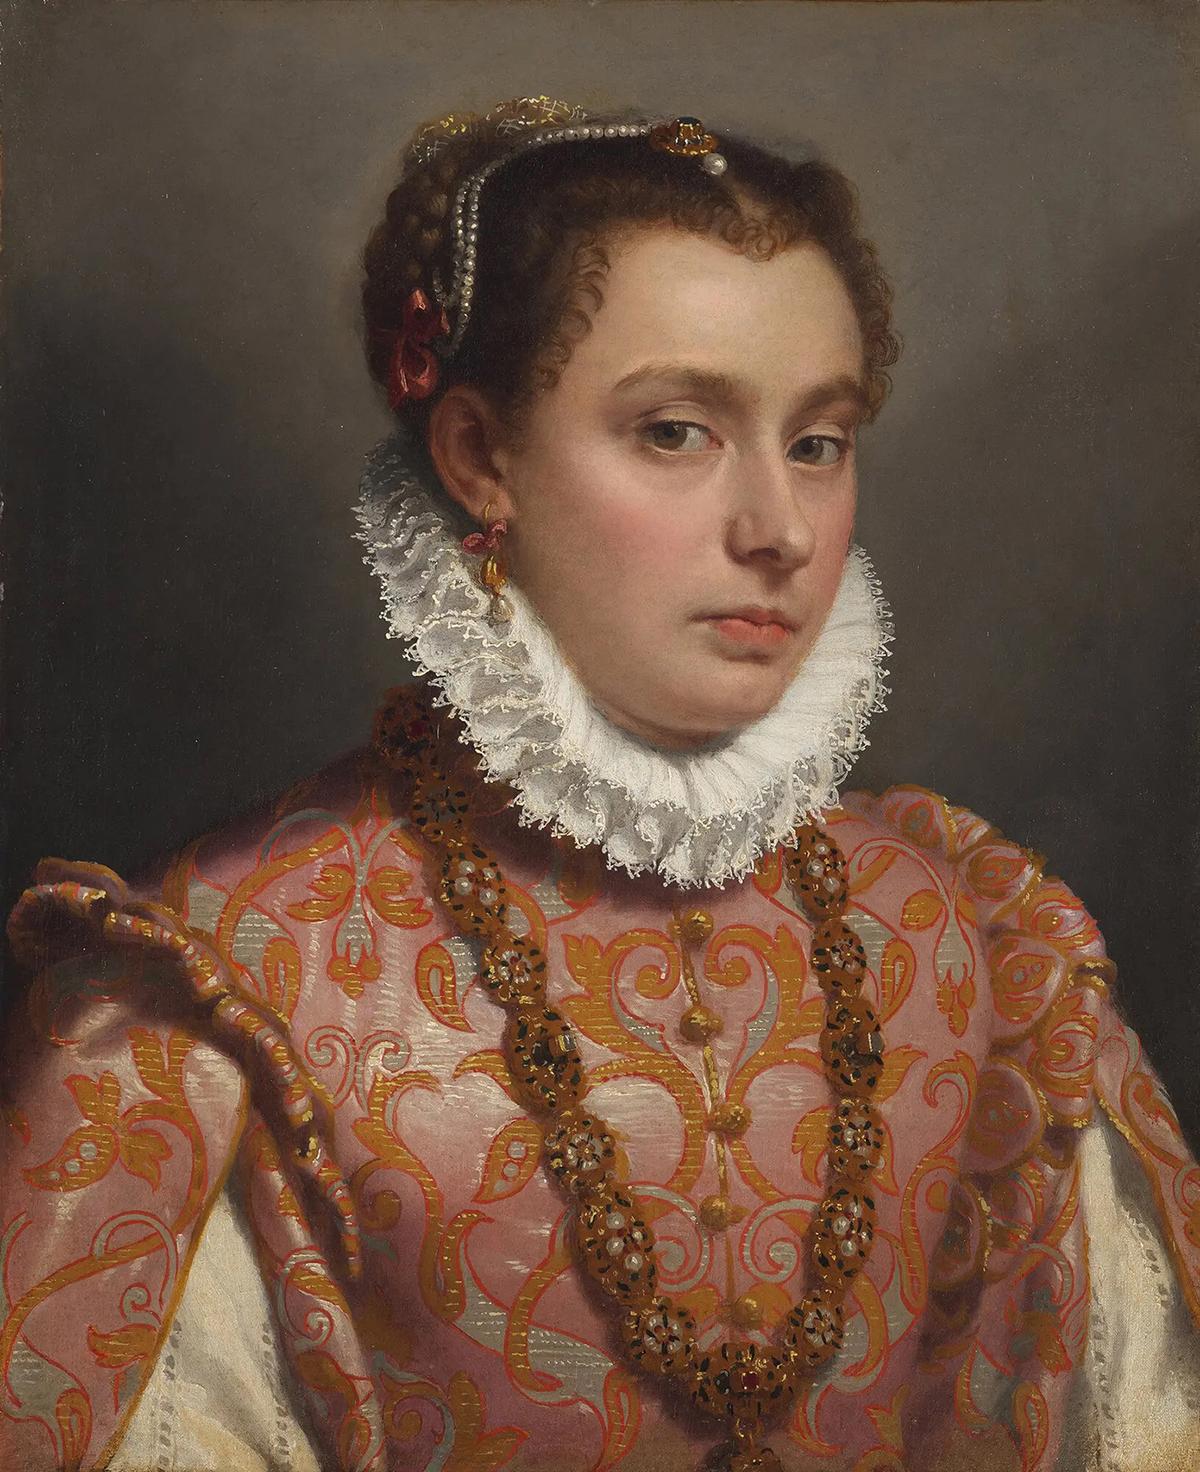 "Portrait of a Young Woman," circa 1575, by Giovanni Battista Moroni. Oil on canvas; 20 3/8 inches by 16 5/16 inches. The Frick Collection, New York City. (Public Domain)